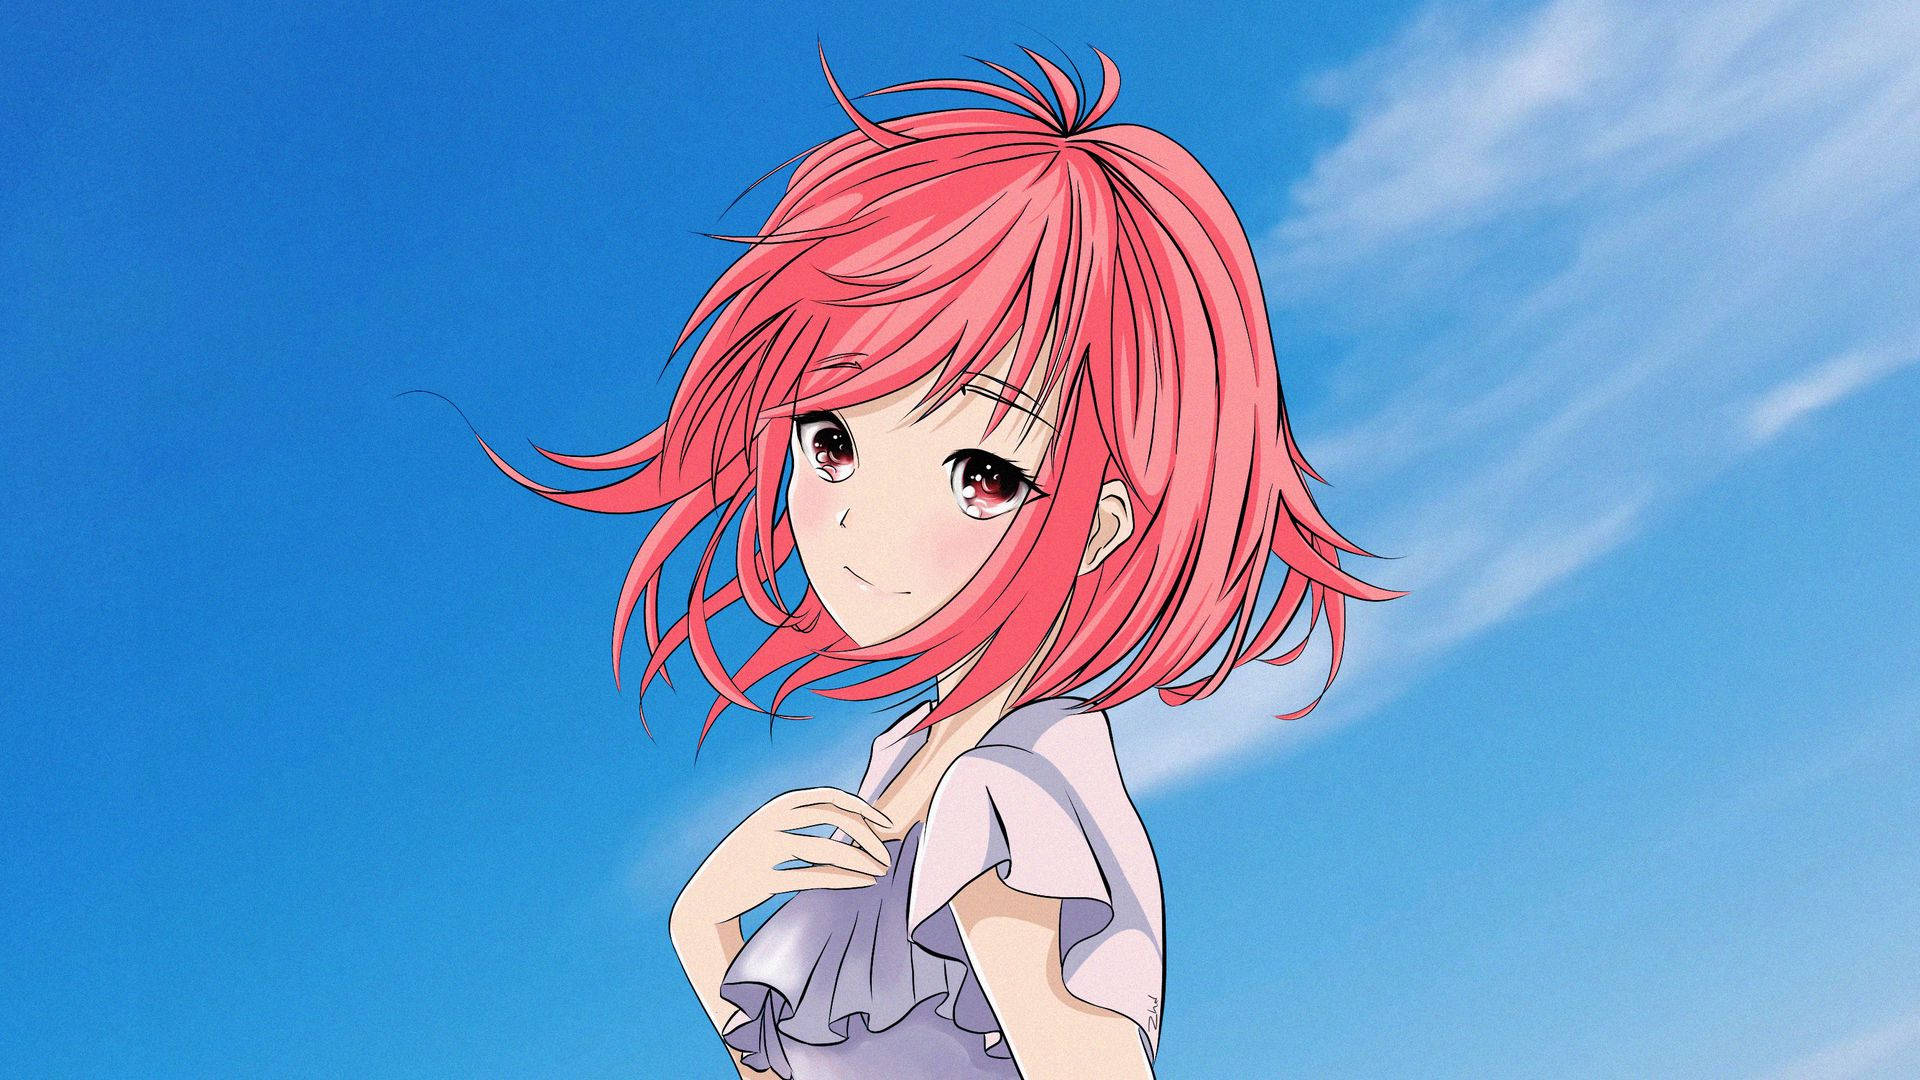 Download Cute Anime Girl With Pink Hair Wallpaper